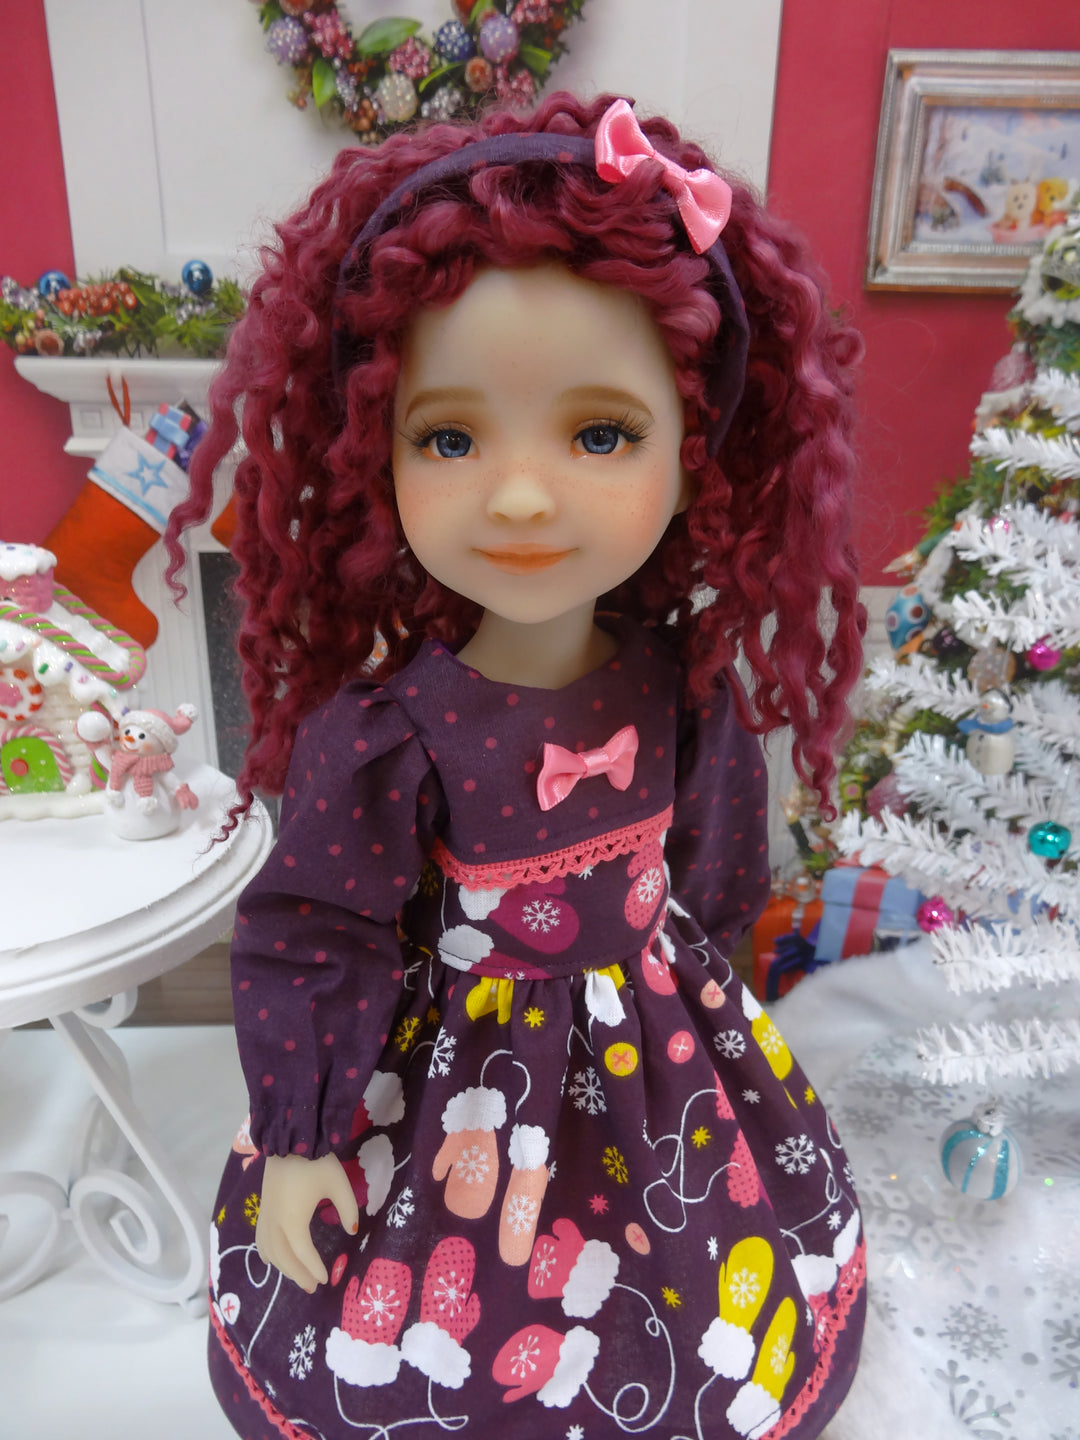 Warm Mittens - dress ensemble for Ruby Red Fashion Friends doll